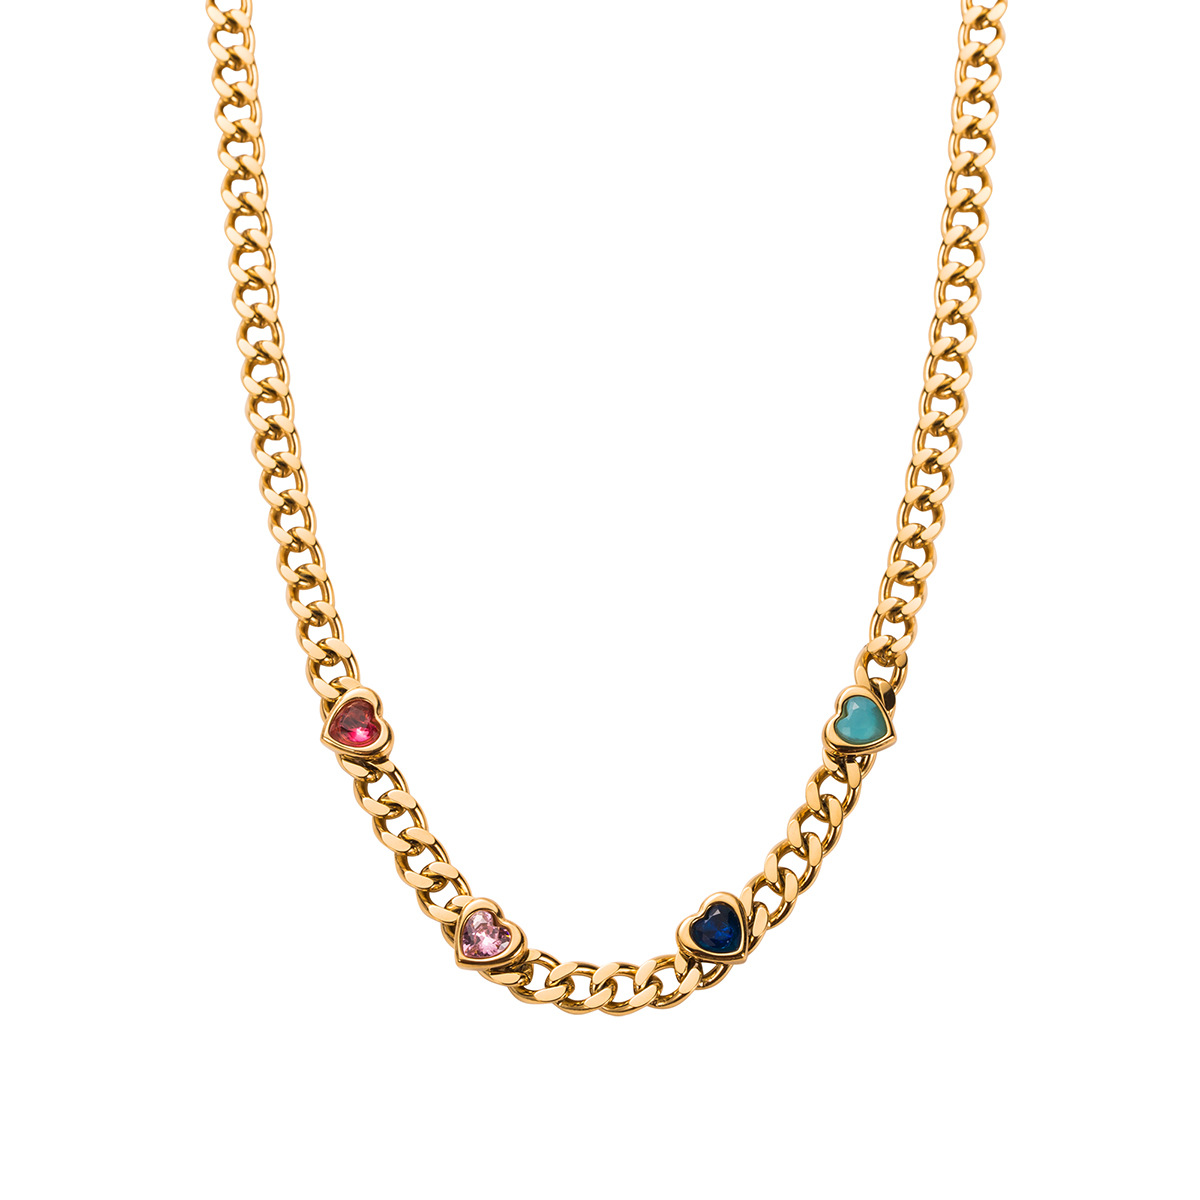 2:B necklace 16-18inch